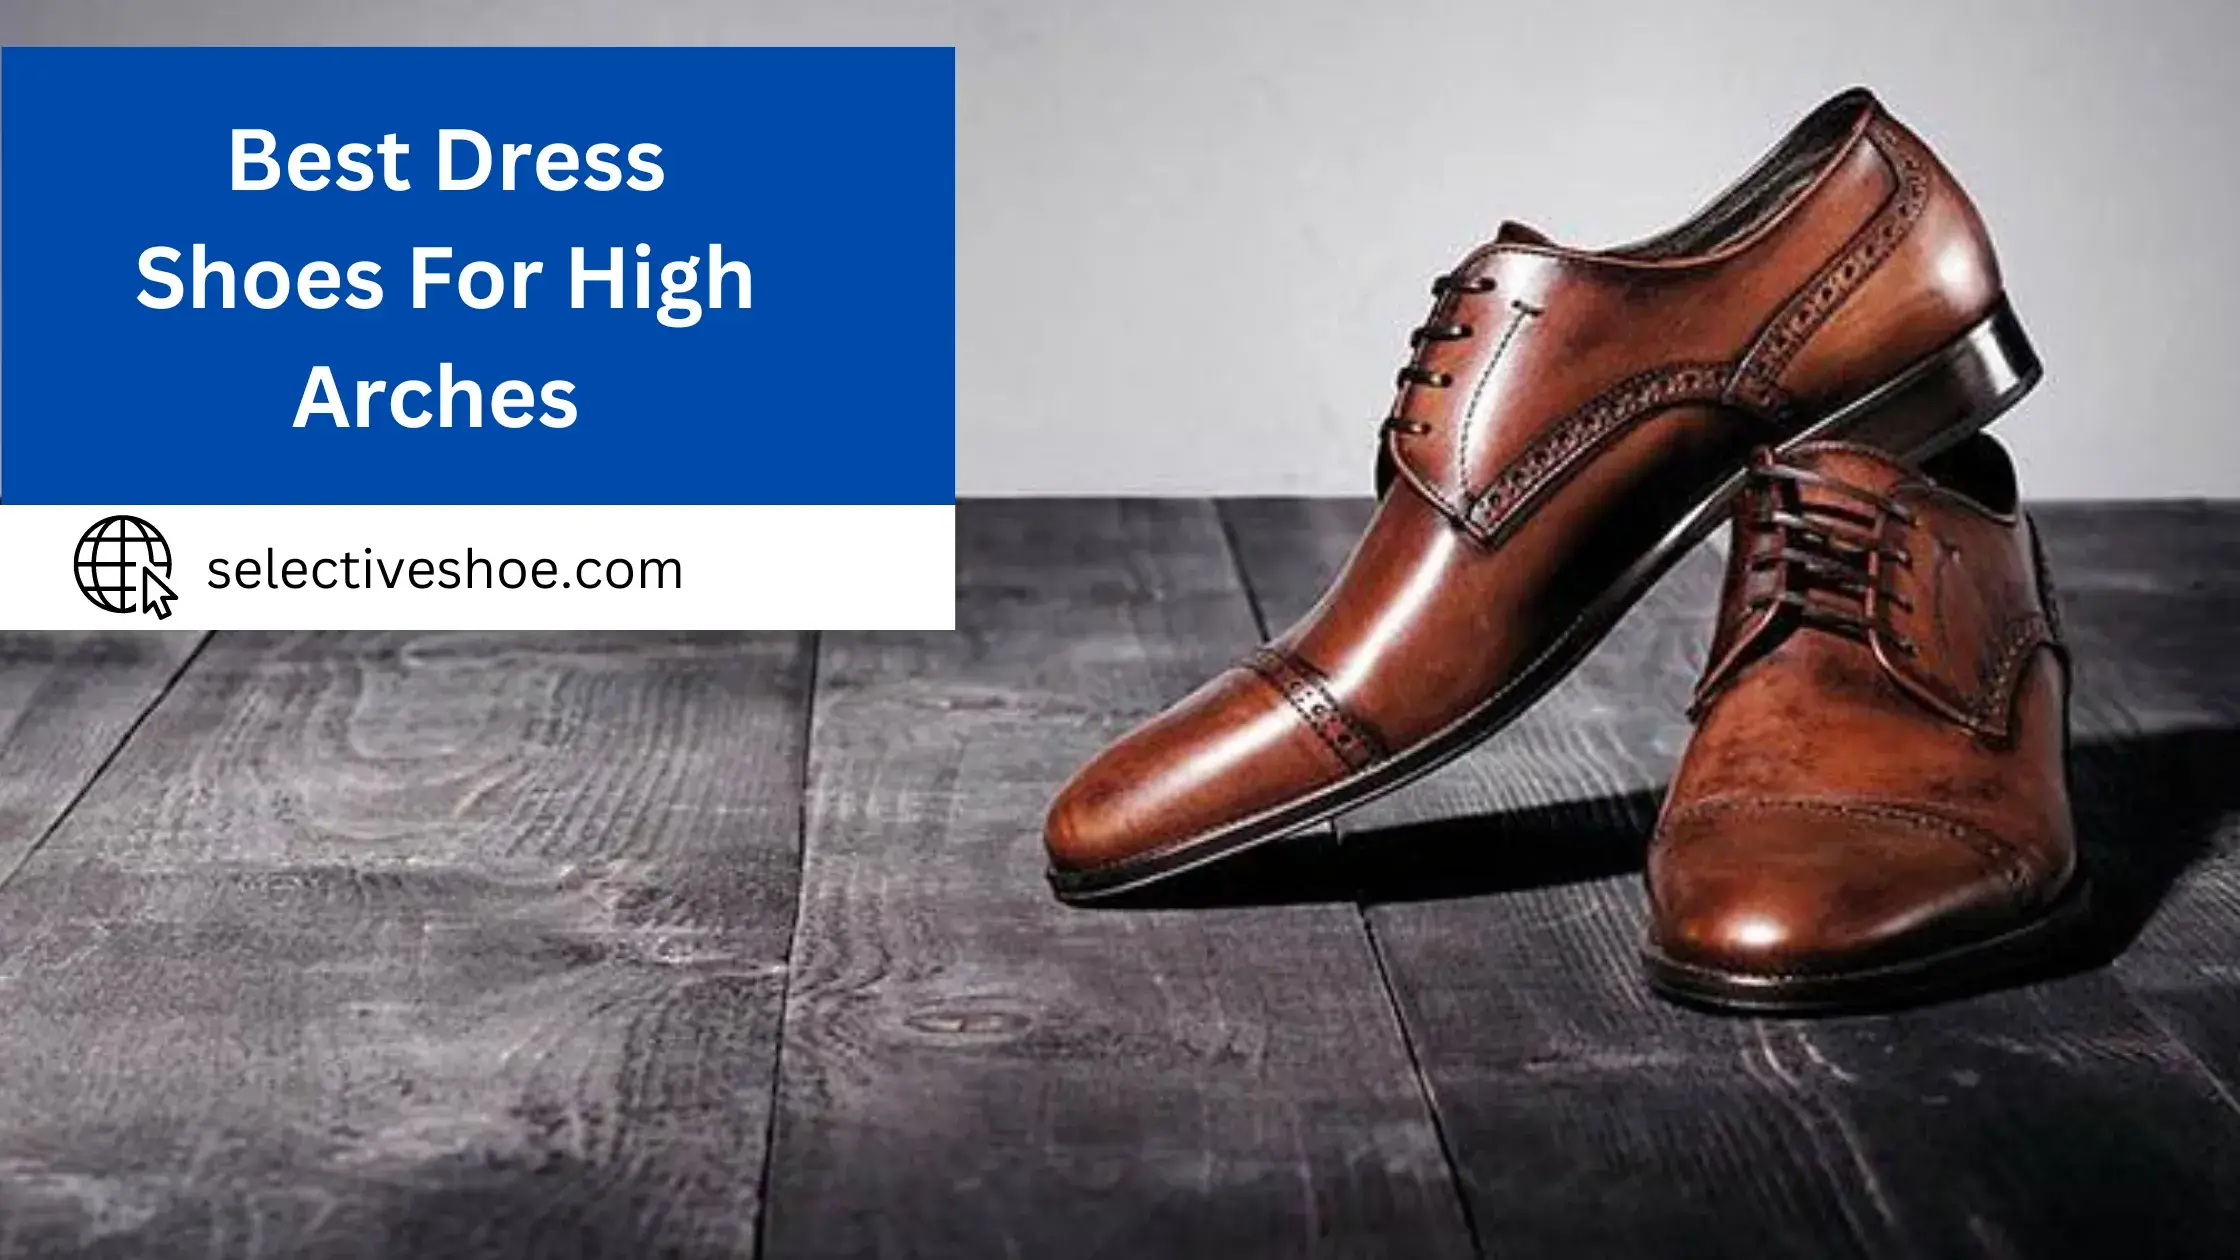 Top Rated 10 Best Dress Shoes For High Arches